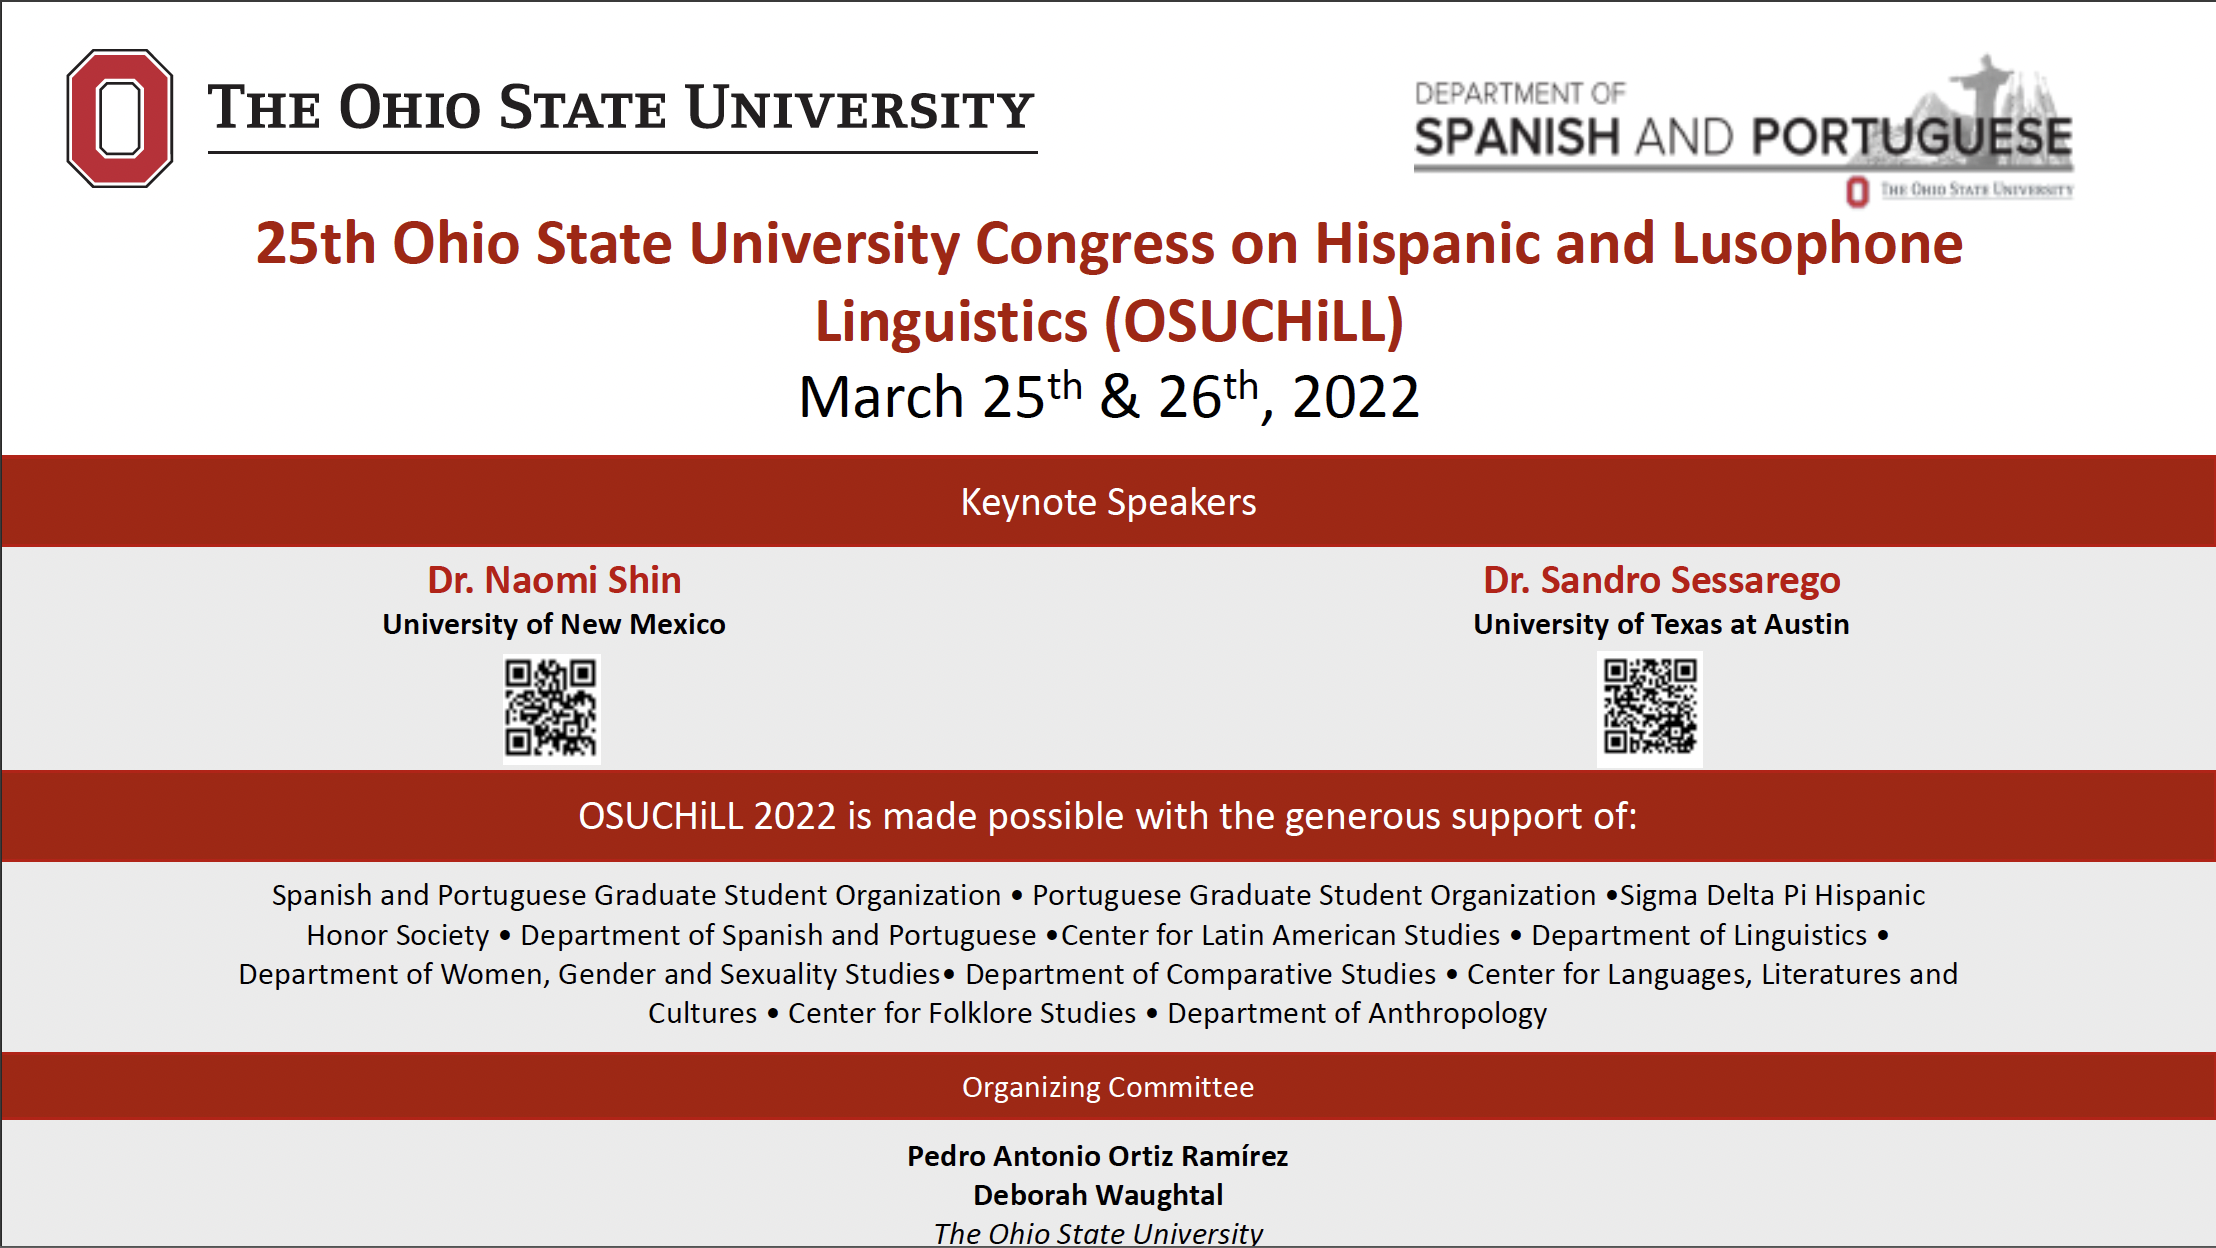 The 25th Annual Ohio State University Congress on Hispanic and